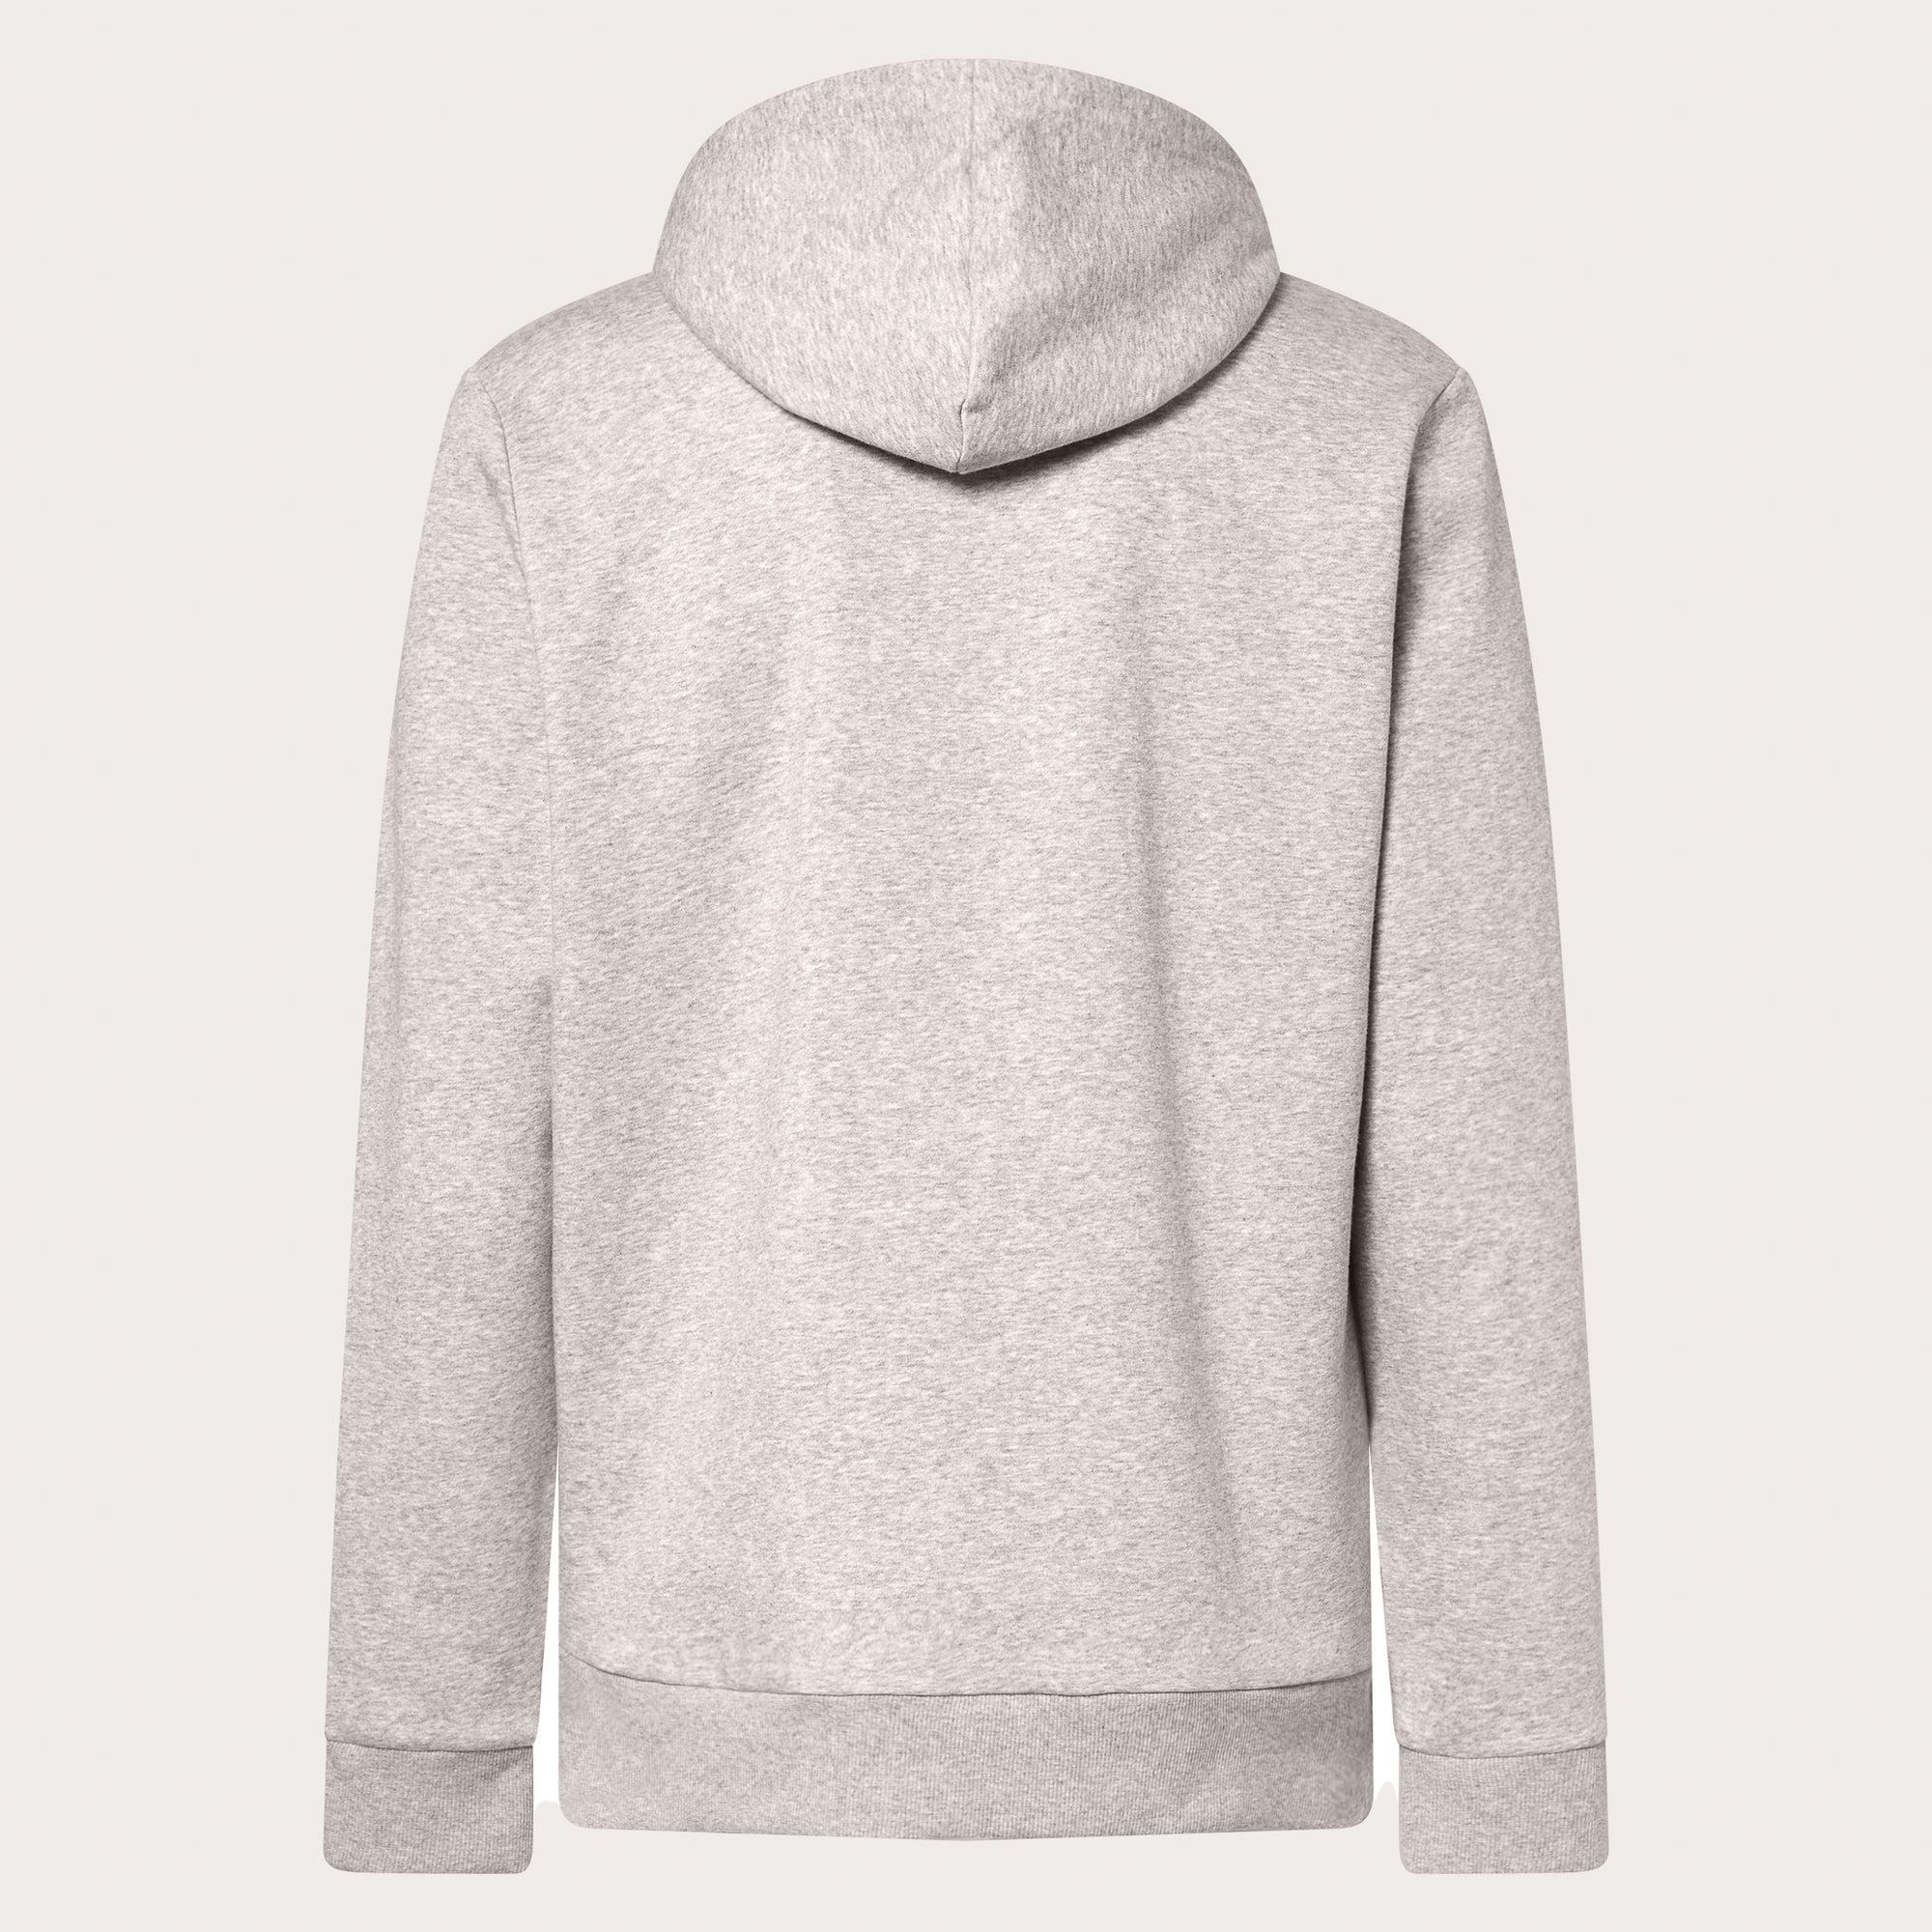 Grey relax pullover hoodie 2.0